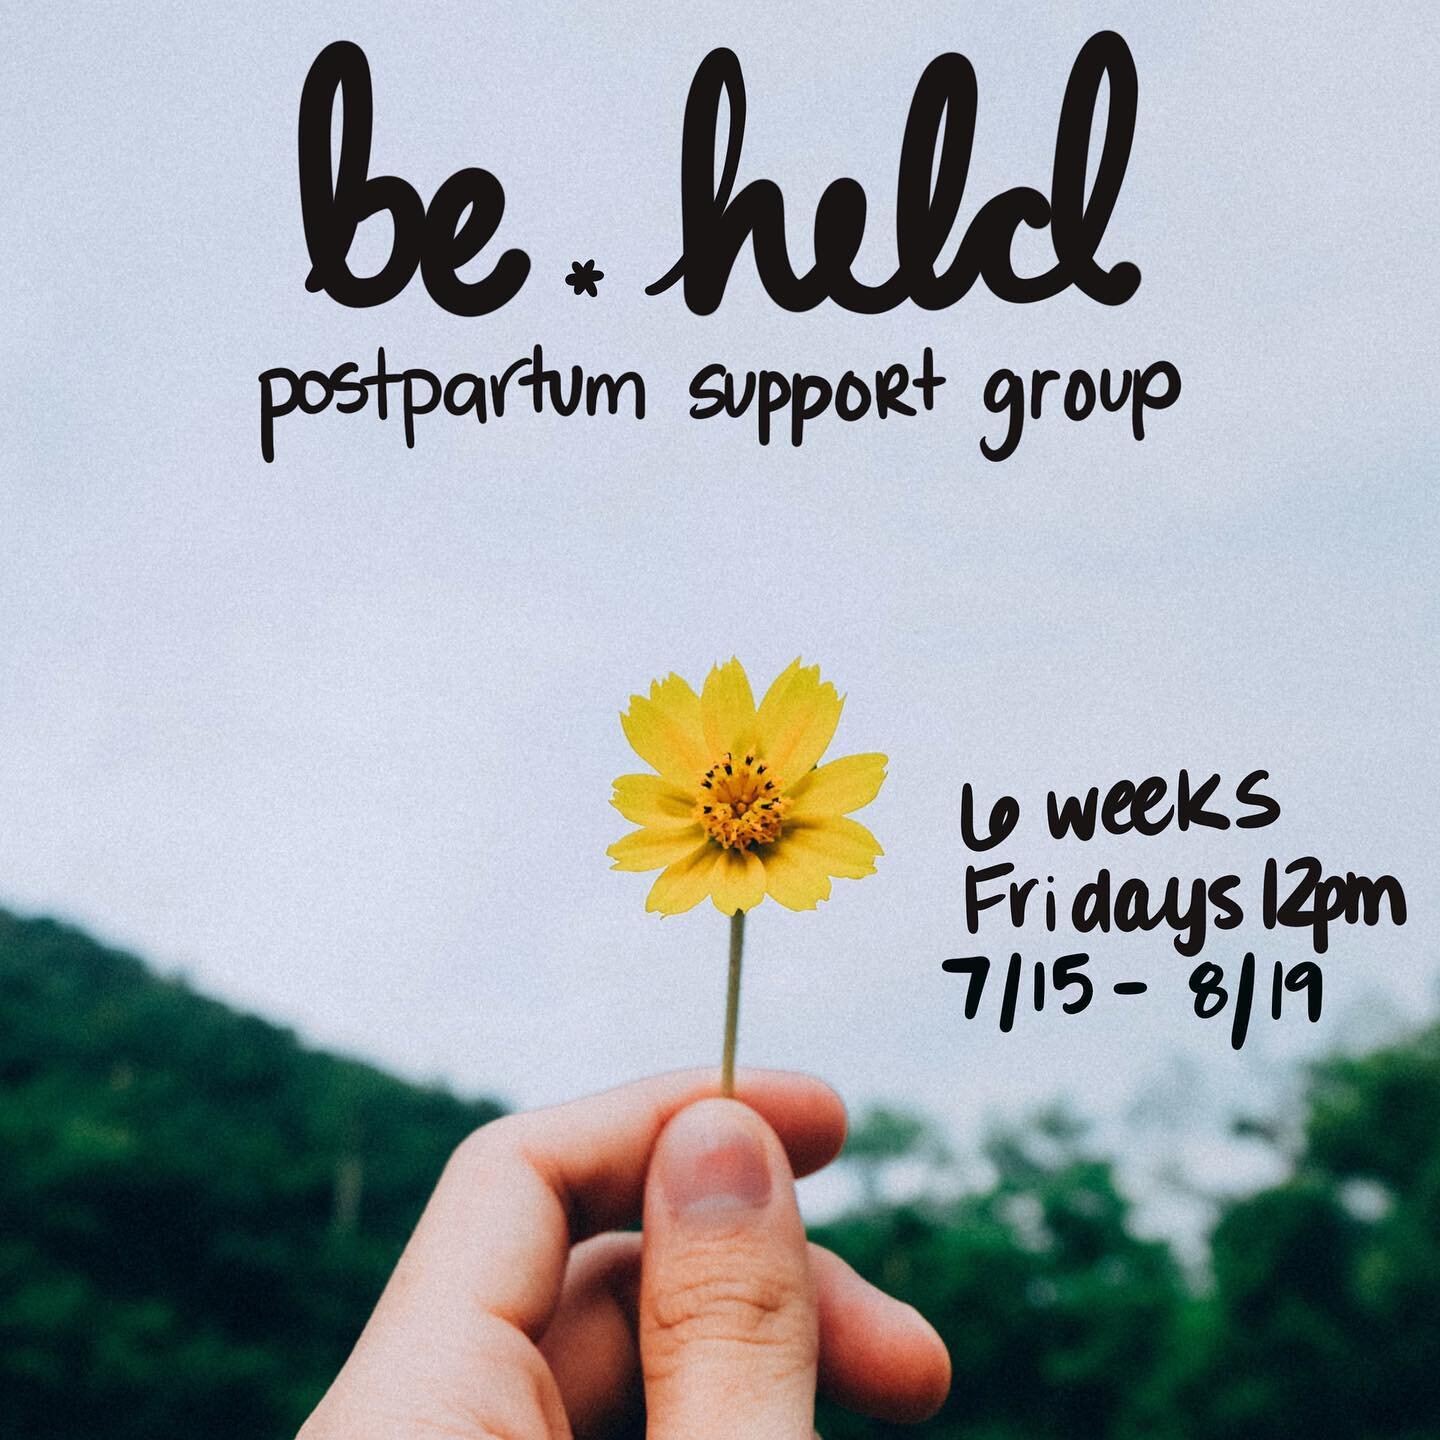 We are back for another round of new parents group starting 7/15! Postpartum is not meant to be experienced alone or in isolation, so join for community, wisdom, and guidance on topics ranging from birth story processing and pelvic floor health to fi